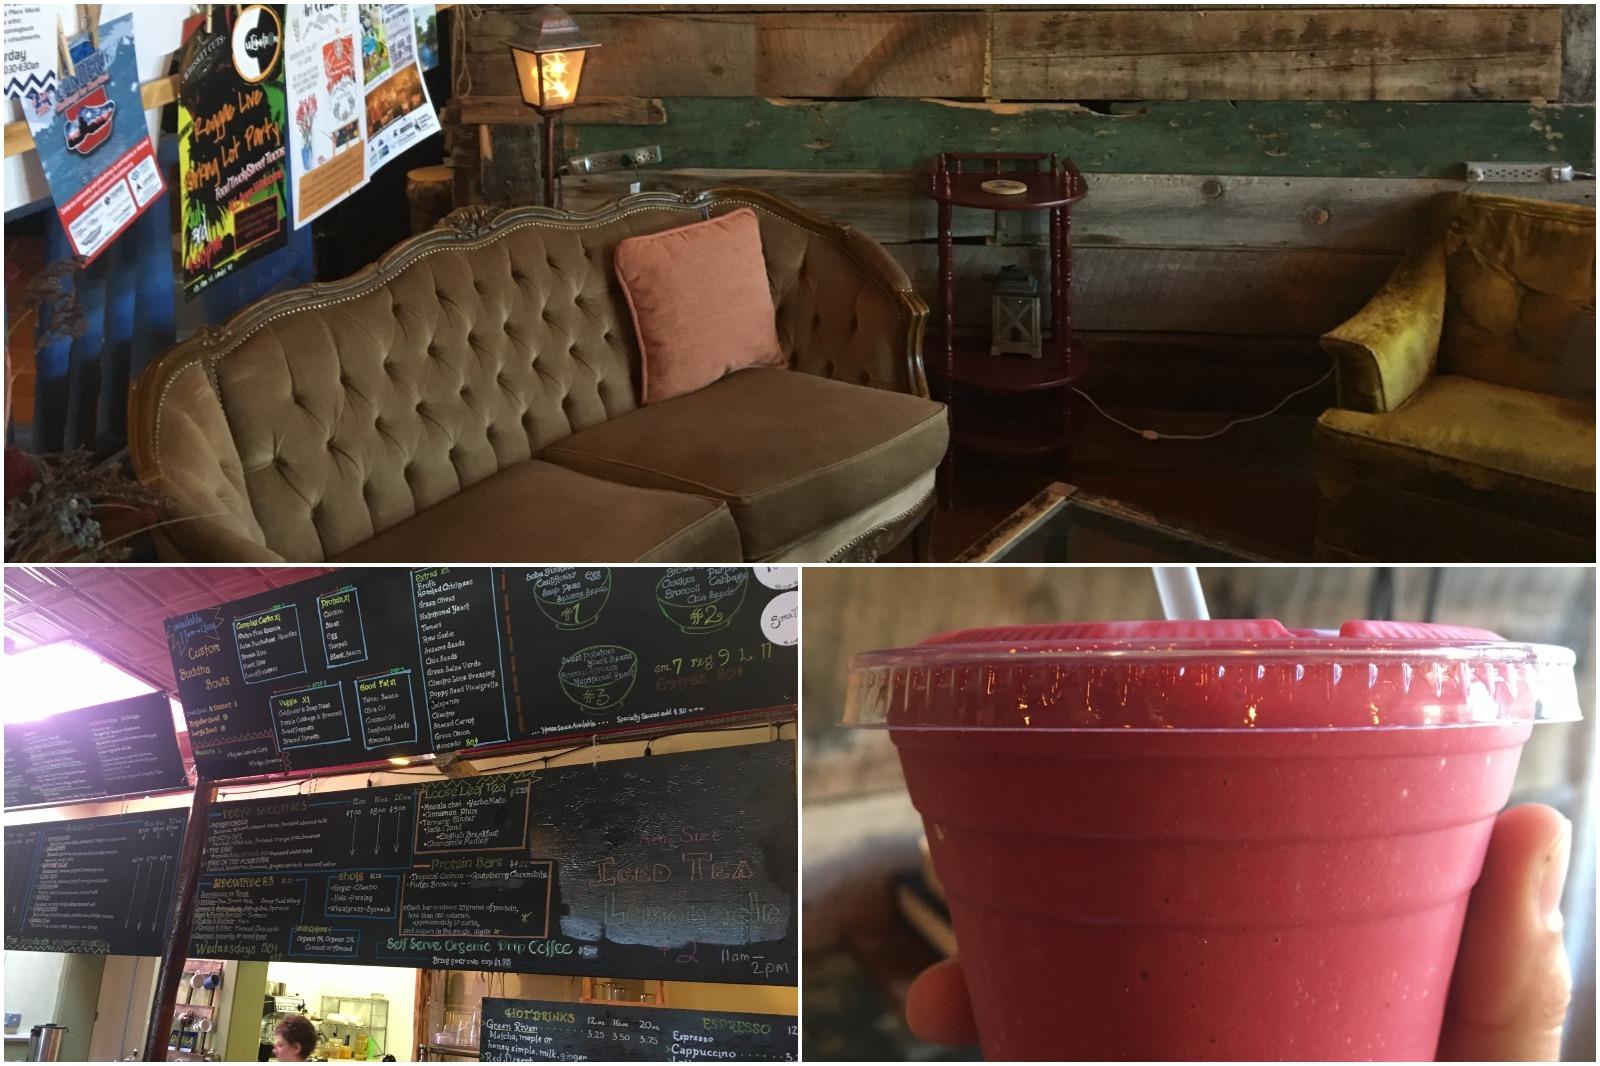 Enjoy a smoothie at the Juicery restaurant in Lander Wyoming